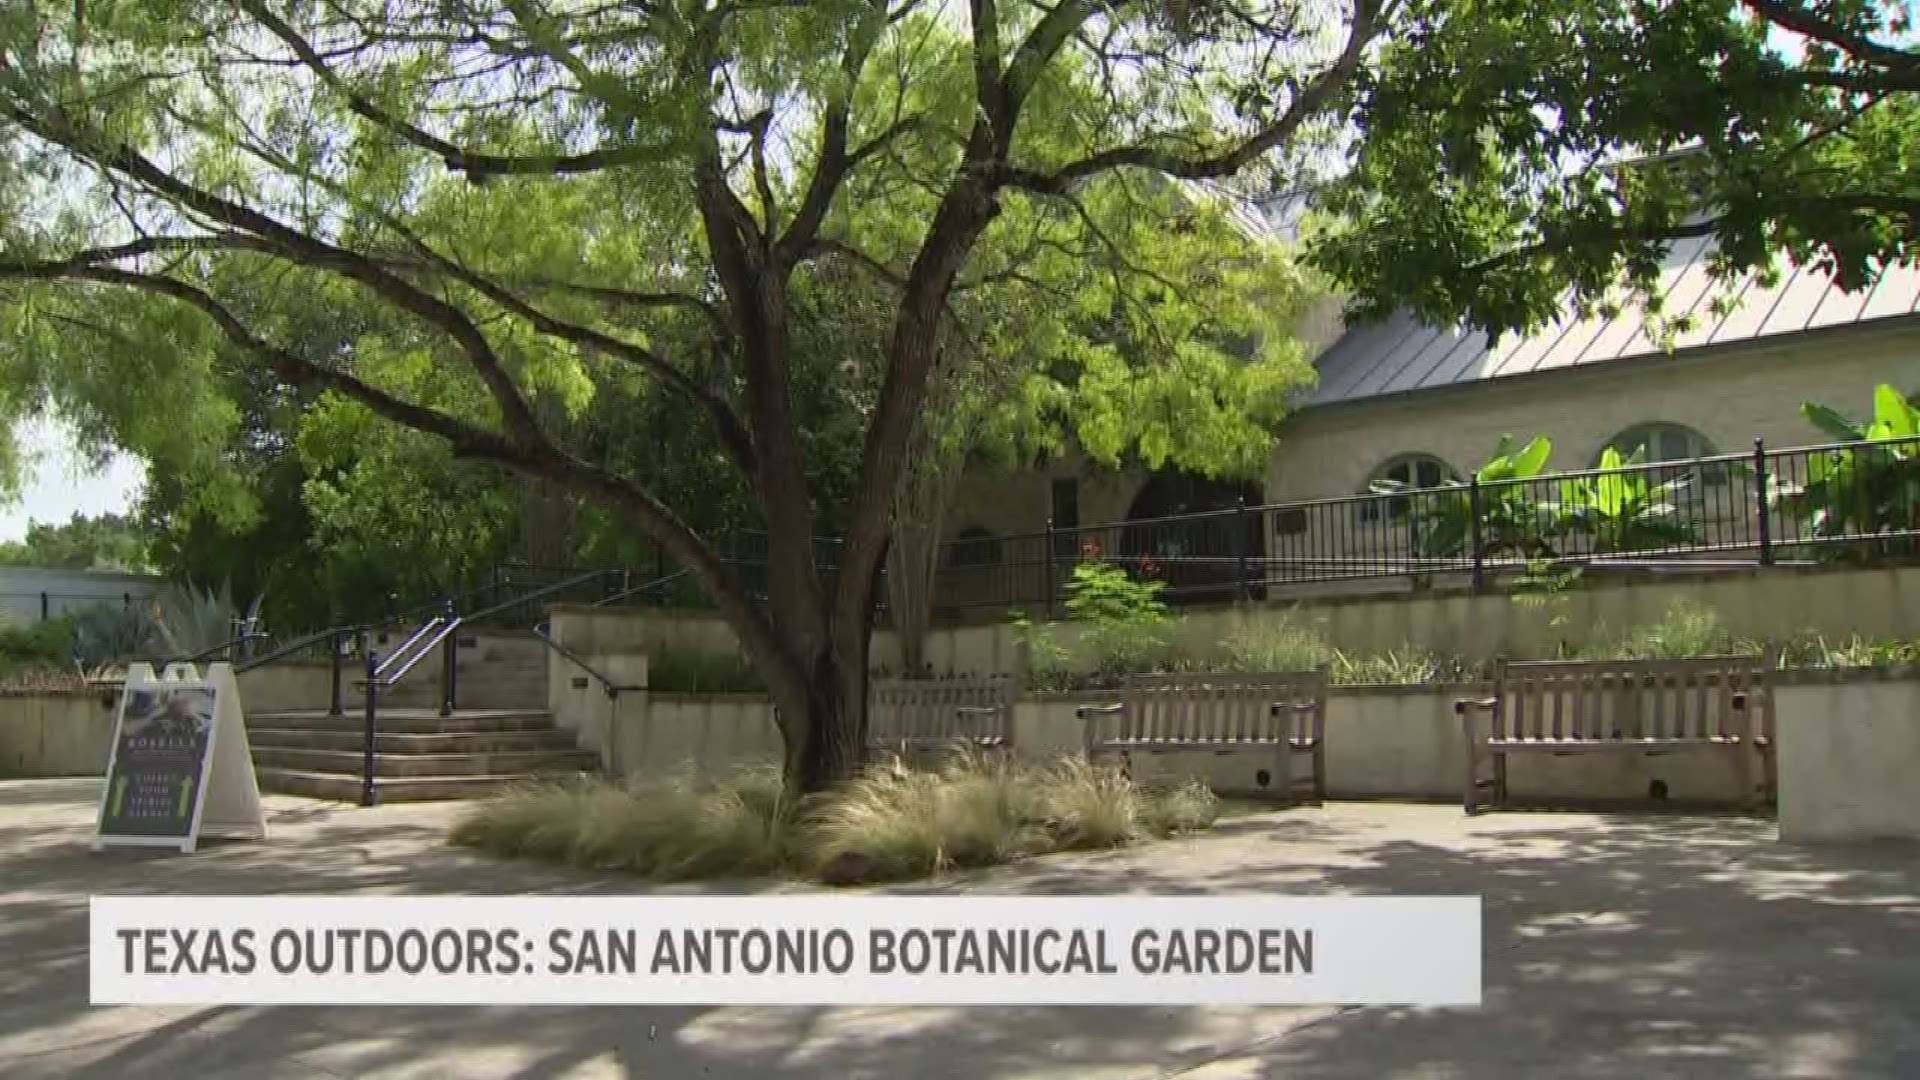 The San Antonio Botanical Garden has finished an expansion 20 years in the making, and the results are astonishing!